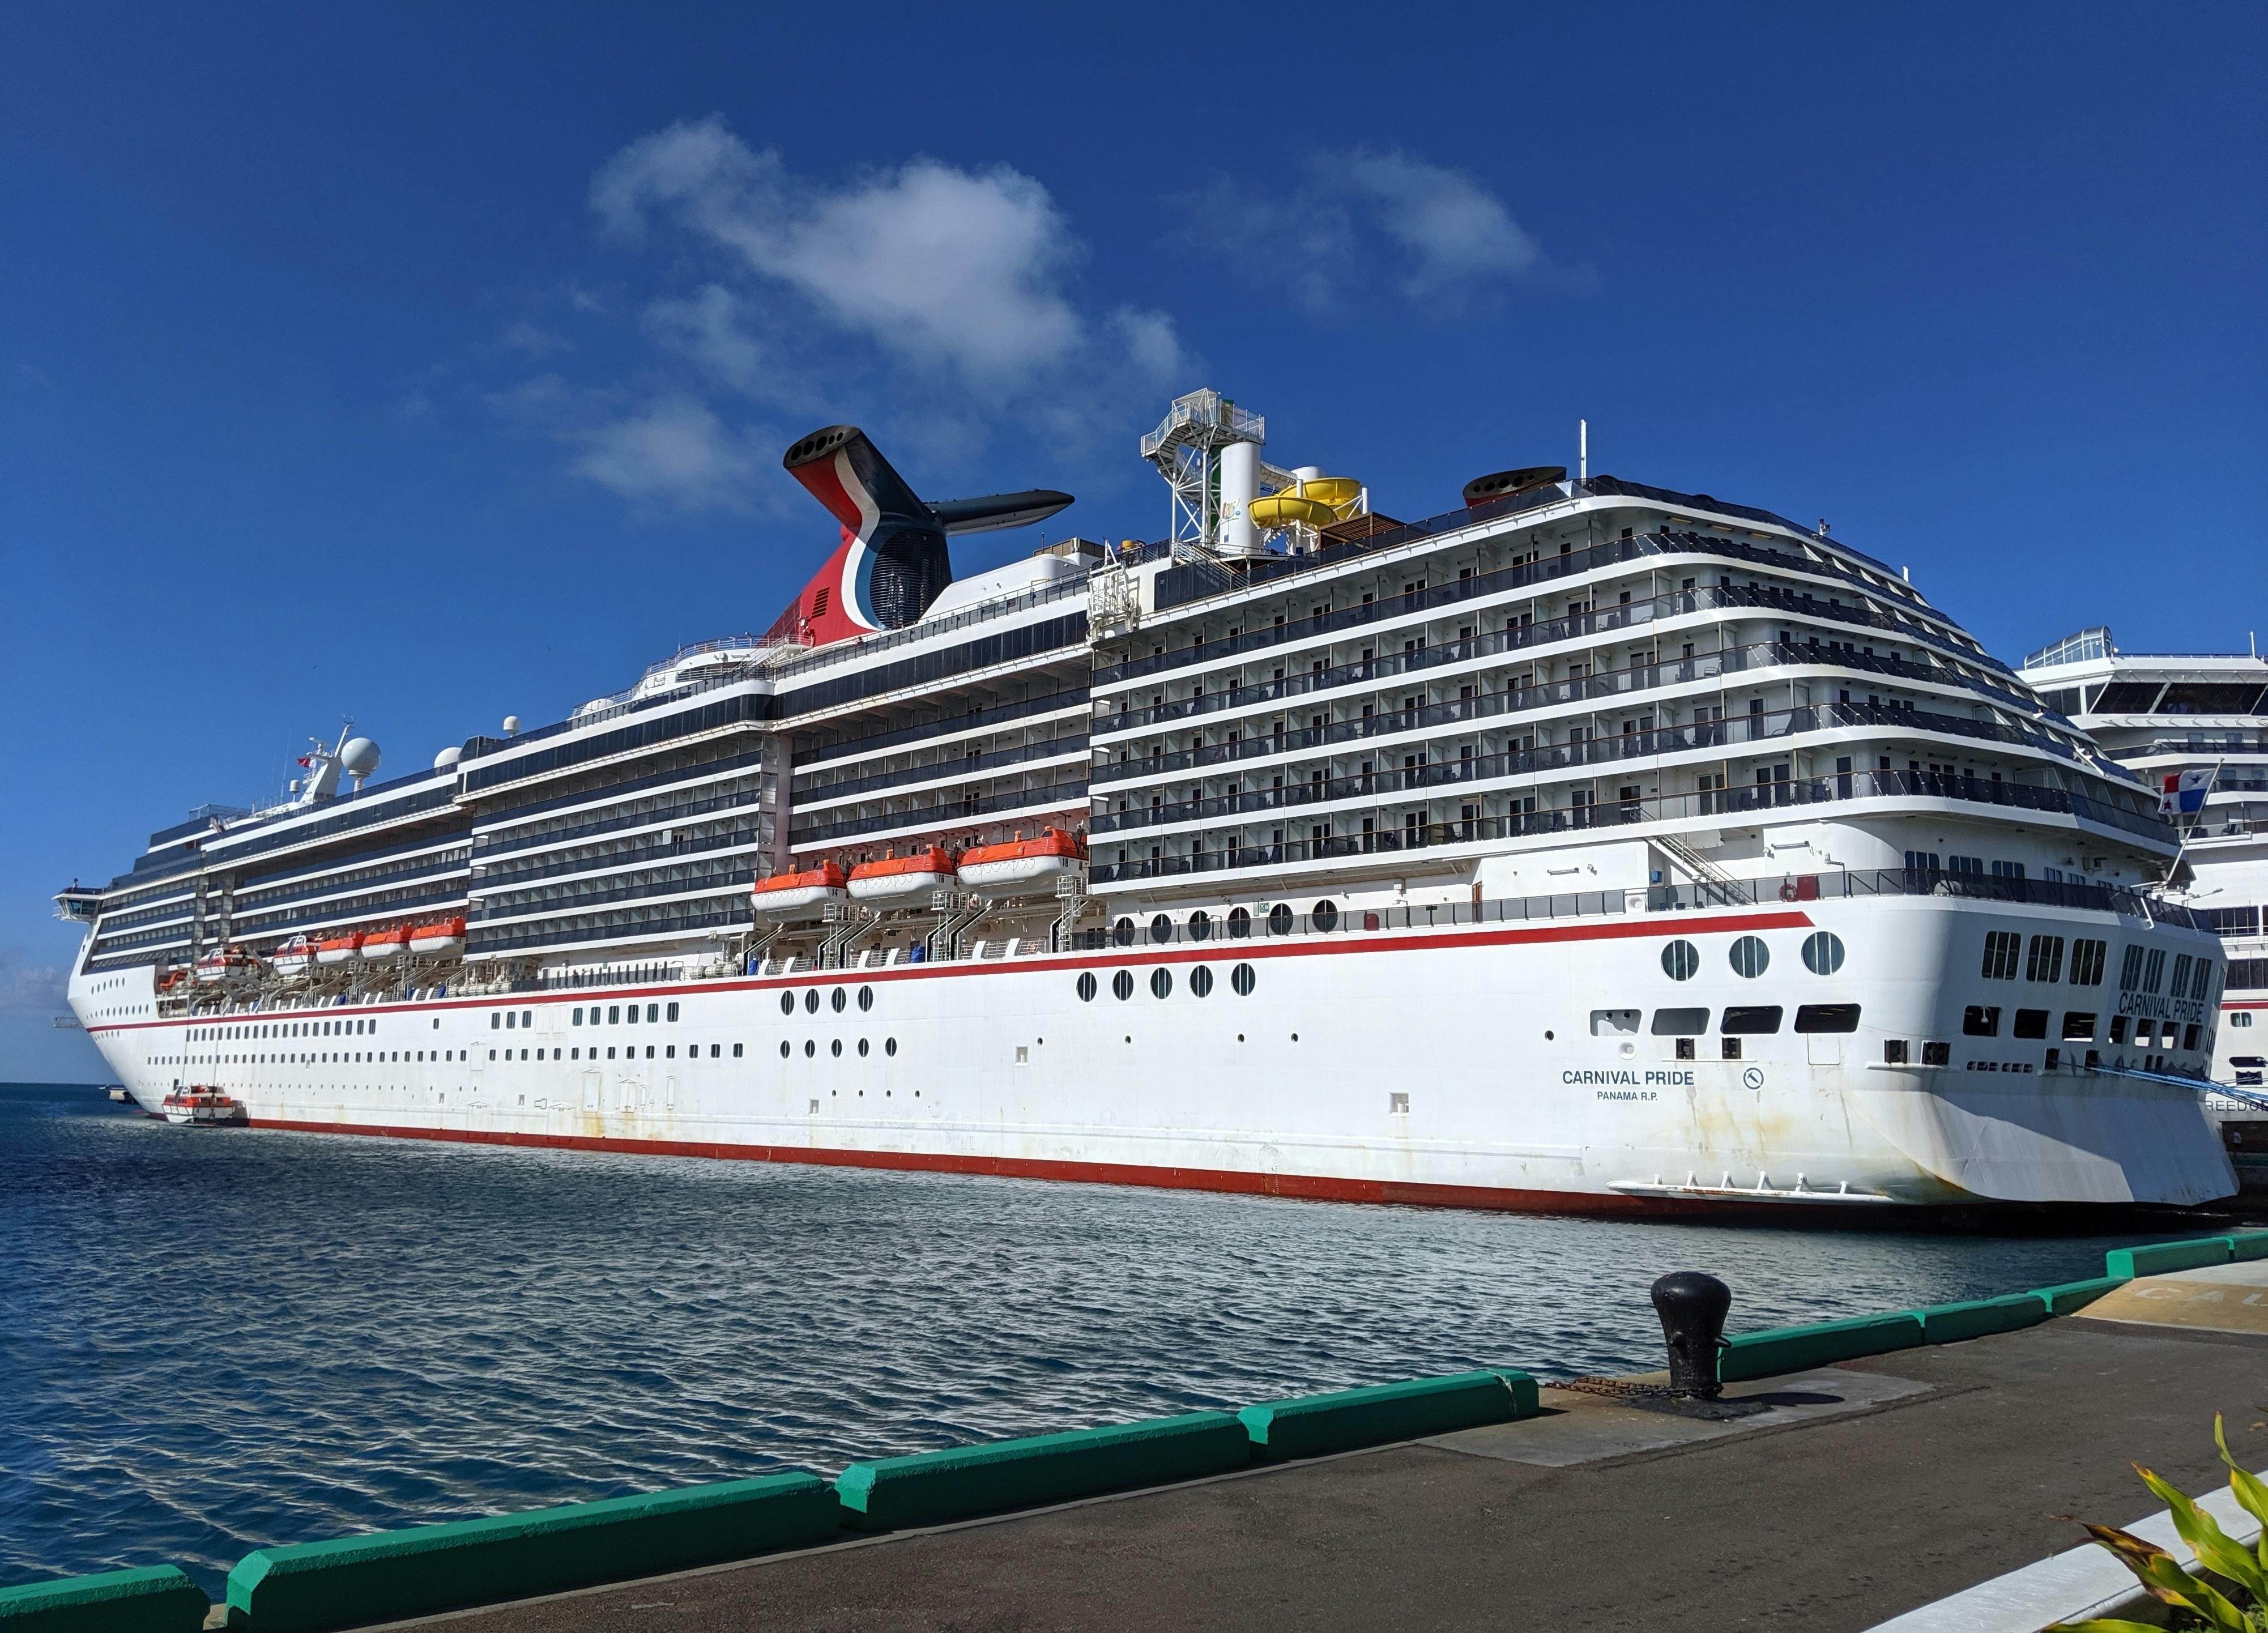 pictures of the carnival pride cruise ship